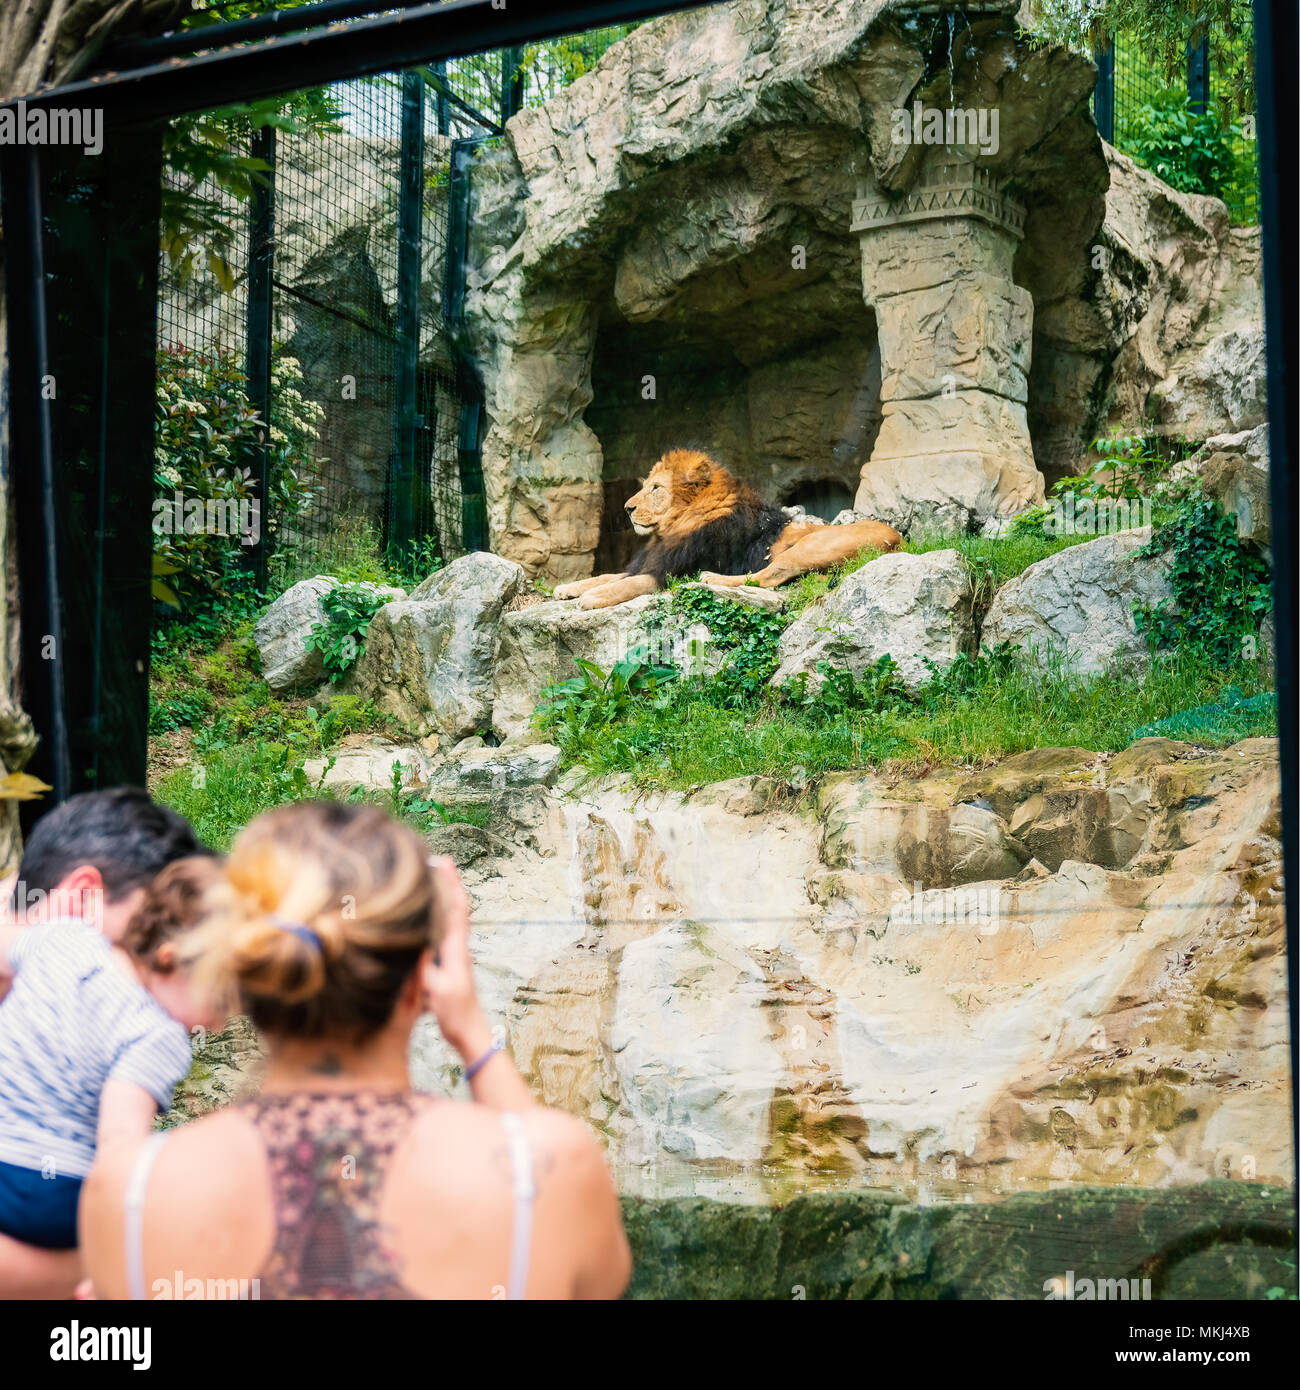 Woman shooting a photo to a Lion at the zoo through the window. Family time at zoo. Stock Photo